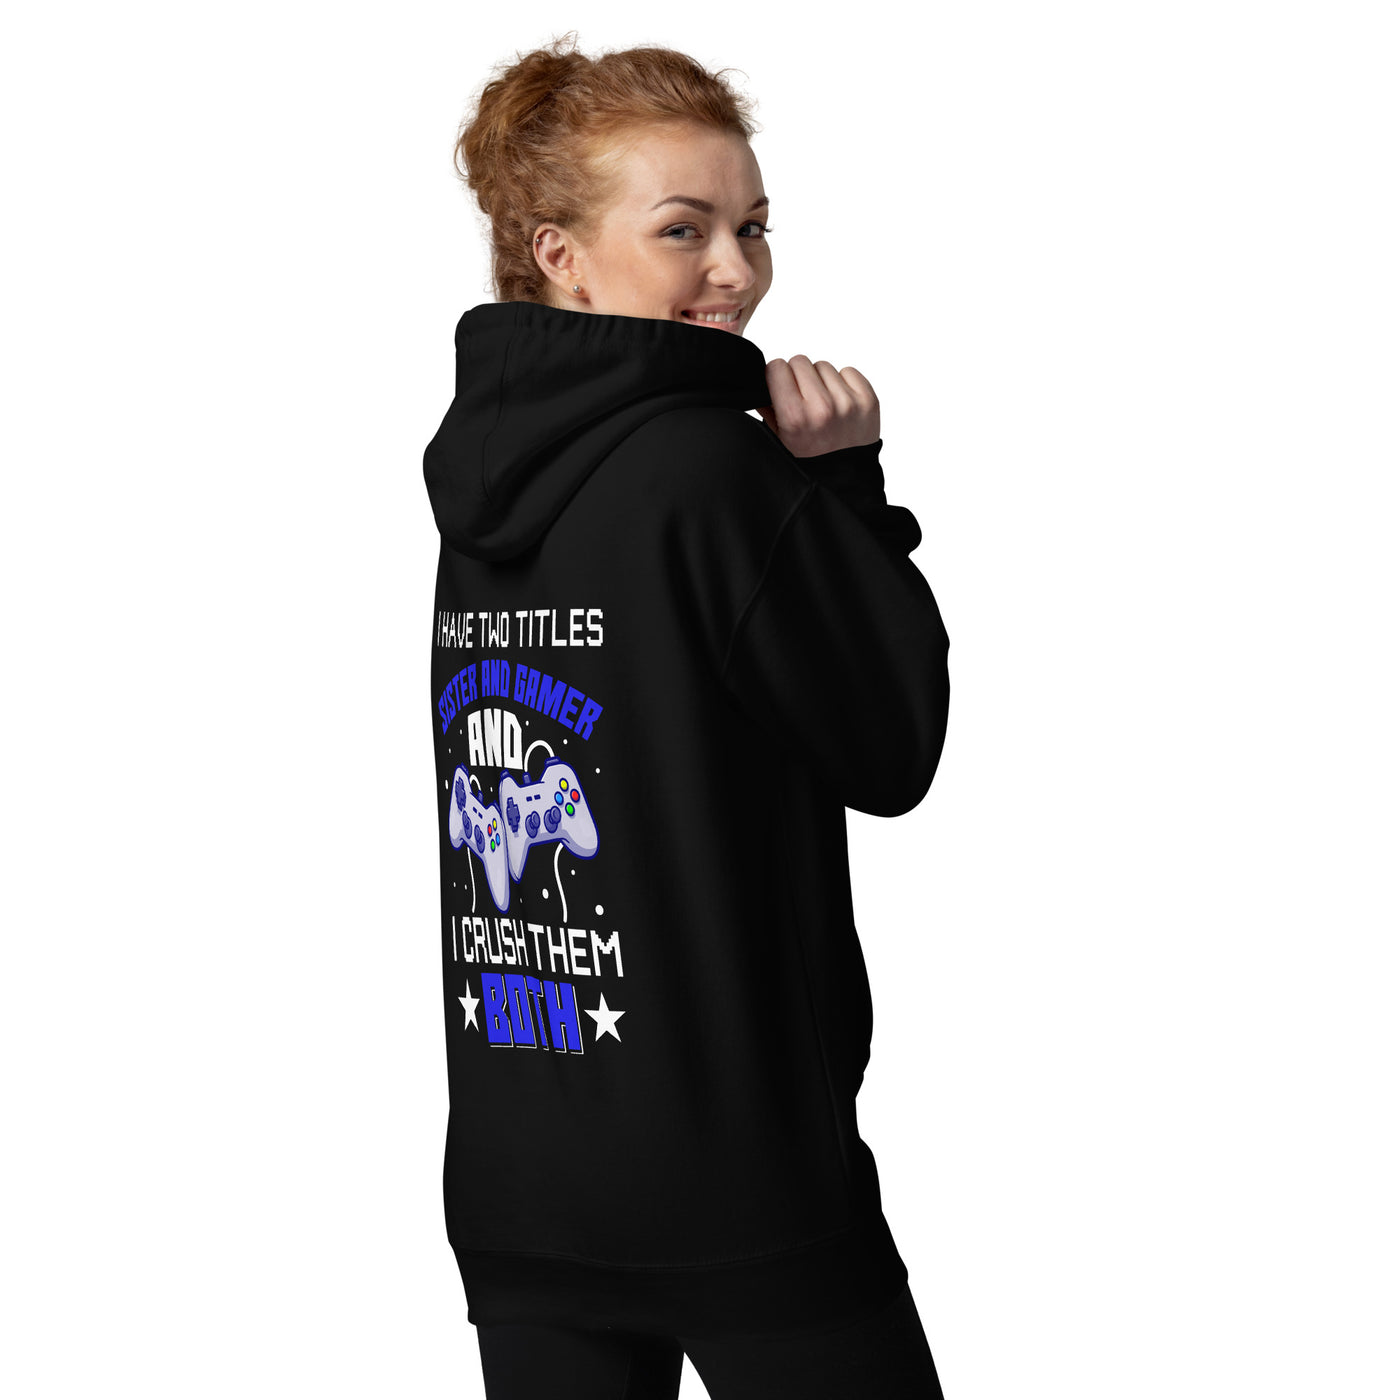 I Have two Titles Sister and Gamer And I Crush Them Both Rima V1 - Unisex Hoodie ( Back Print )